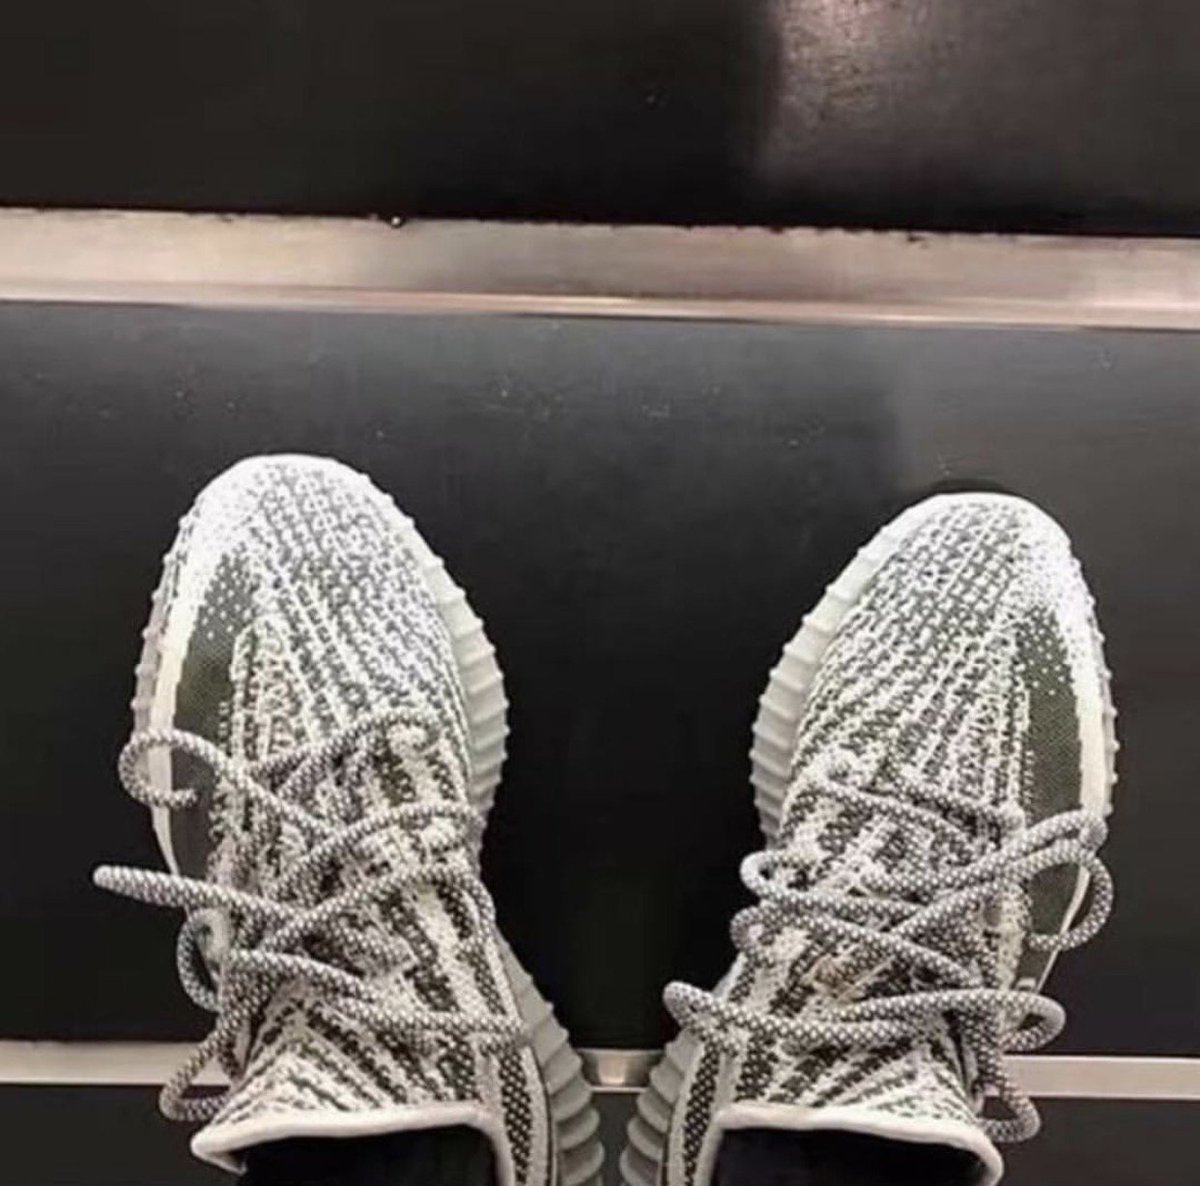 Adidas Yeezy Boost 350 Turtle Dove 2022 Re-Release Info, 53% OFF